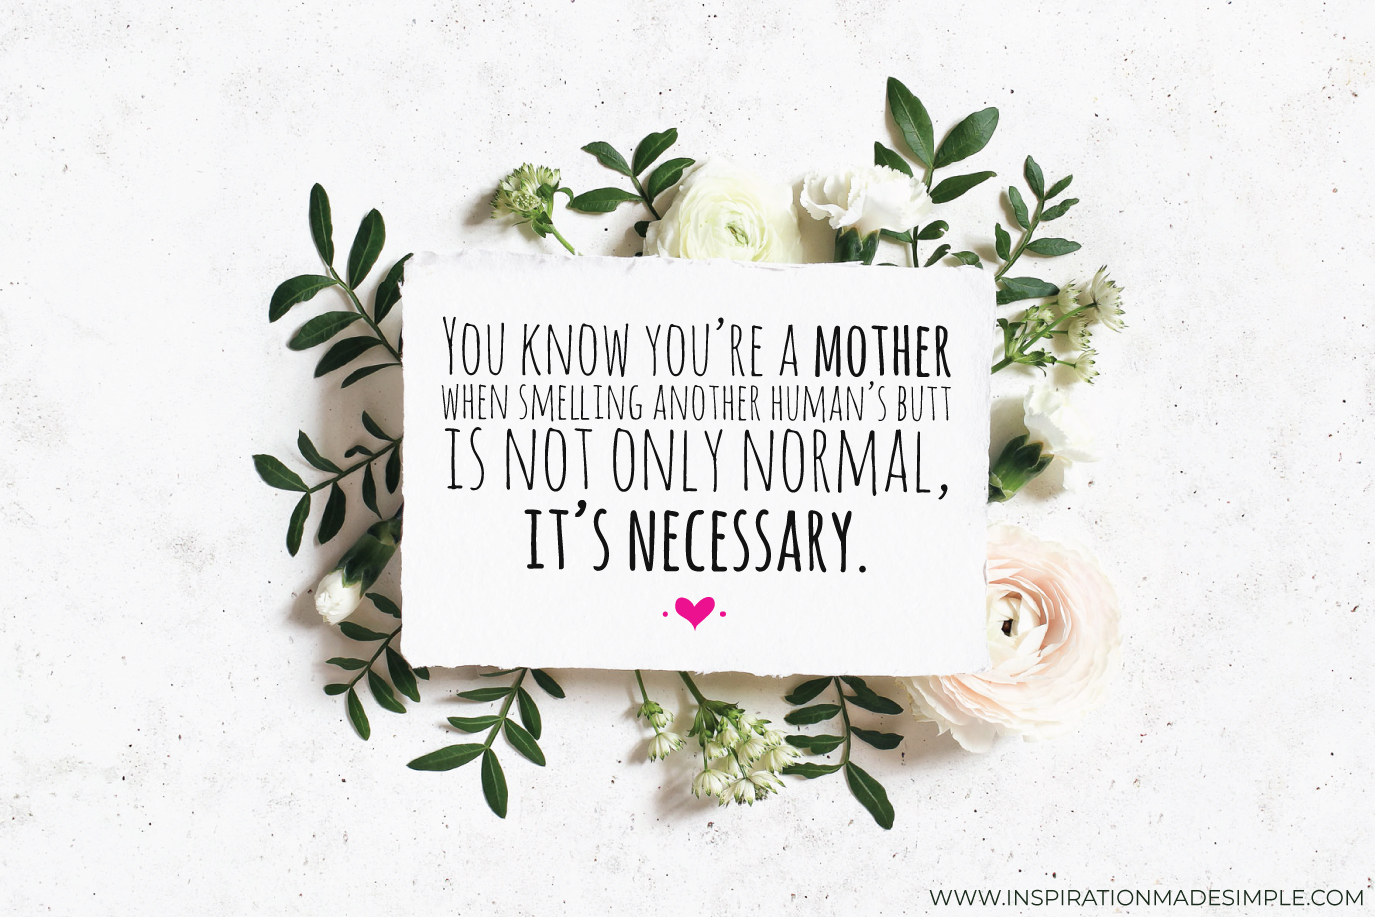 Mom's will love these printable Mother's Day Cards that appreciate the humour of motherhood